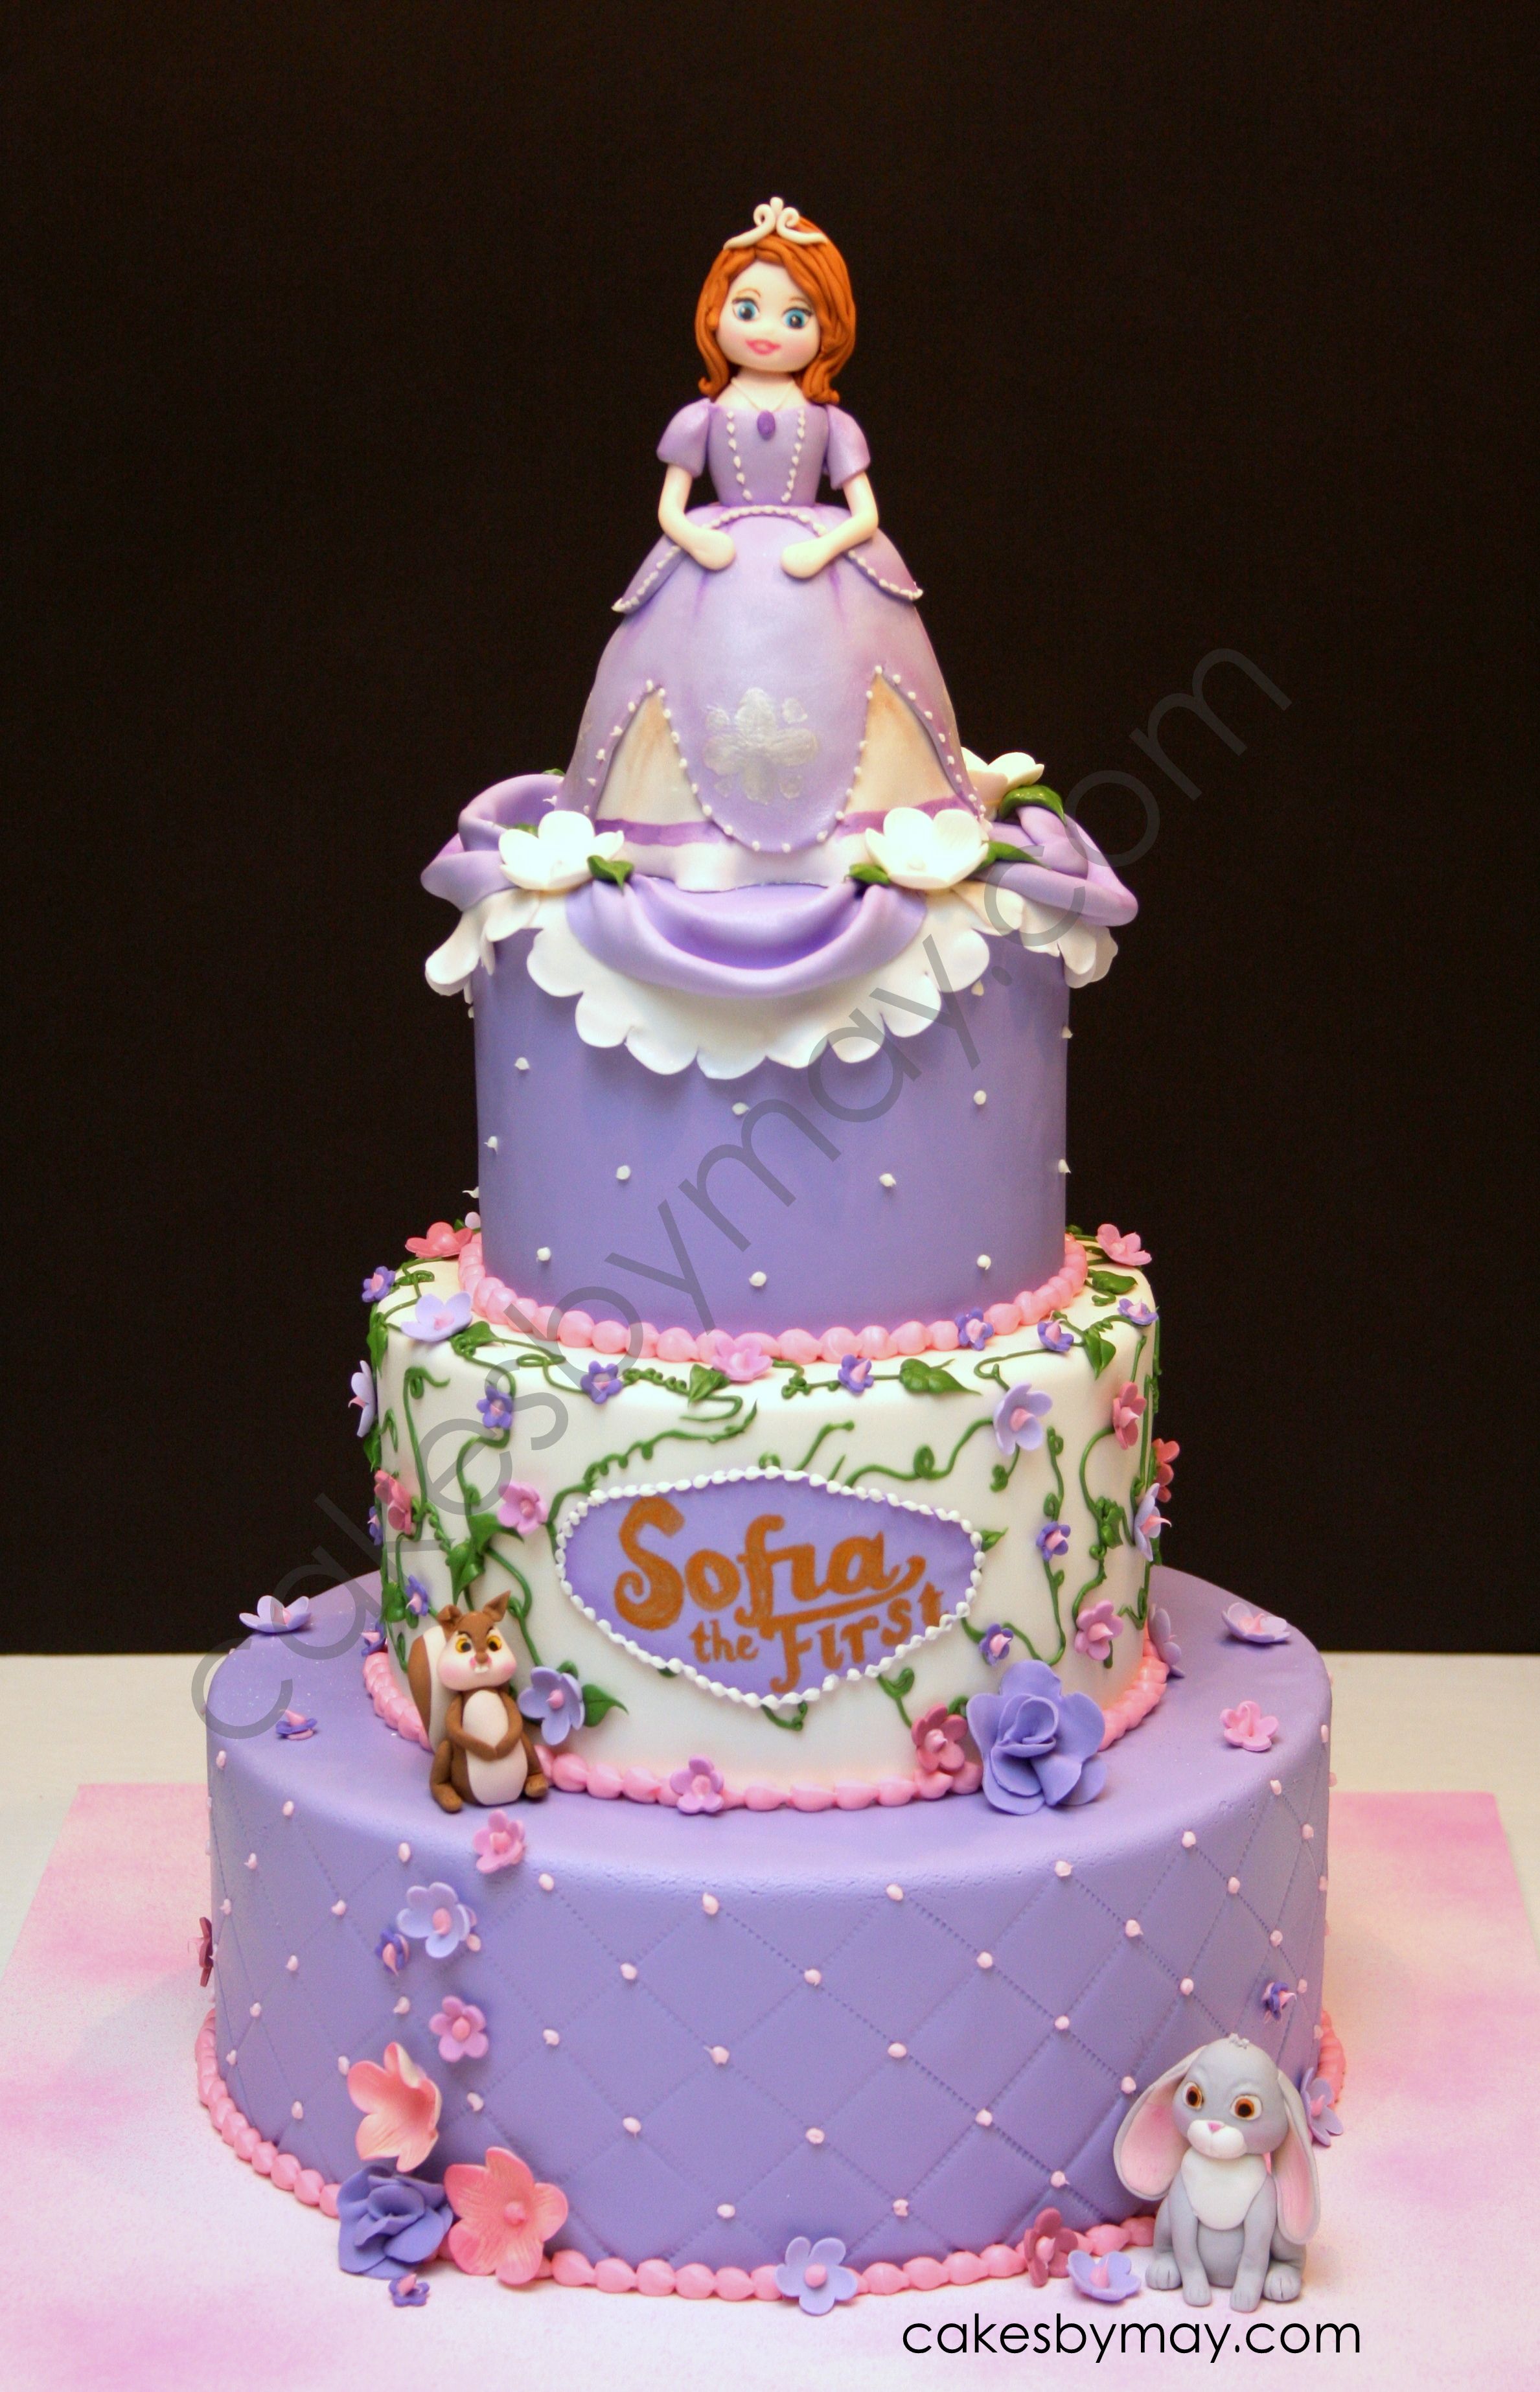 Sofia the First – Love how this cake turned out! Very girly and purple